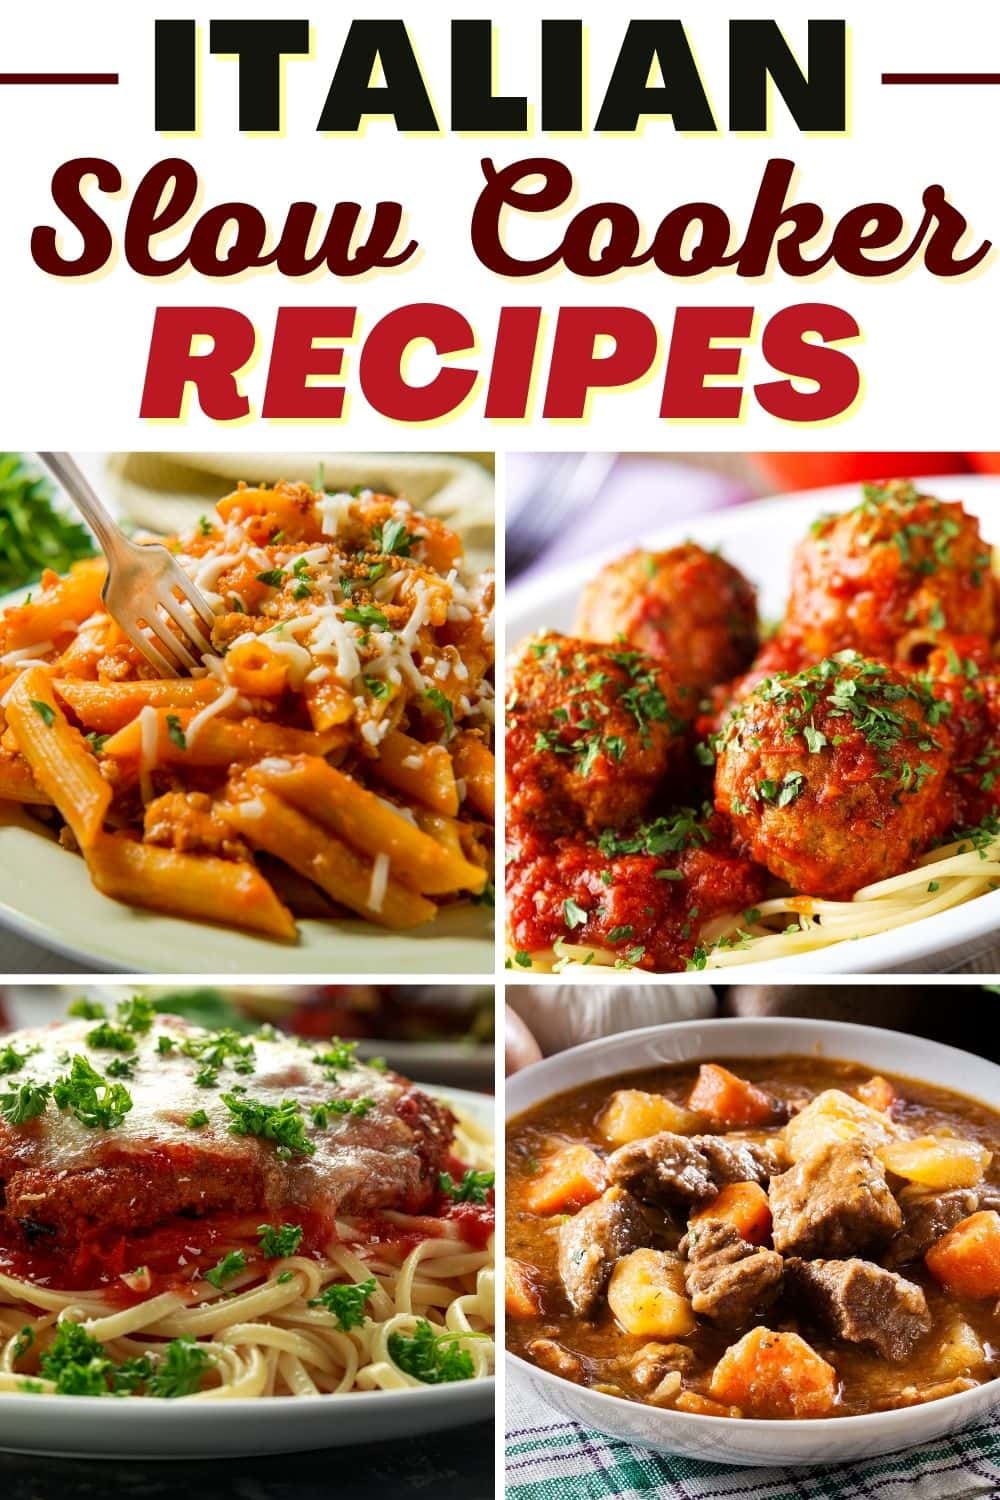 23 Best Italian Slow Cooker Recipes - Insanely Good